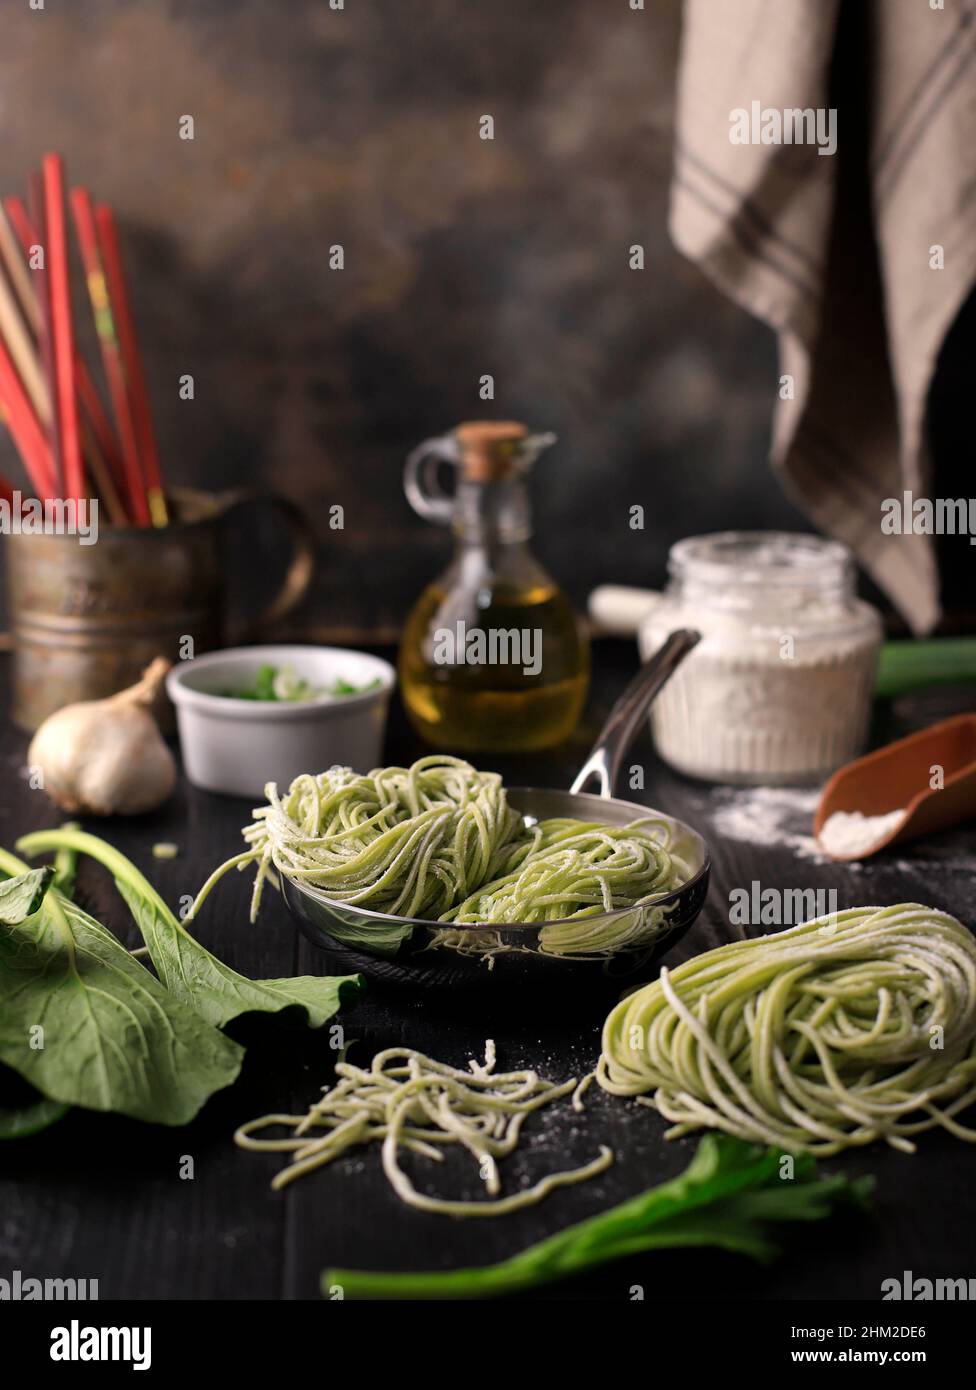 Homemade Raw Asian Green Vegetable Noodle in the Making. Home Cooking Process in the Kitchen (Mie Sawi Sayur). Stock Photo